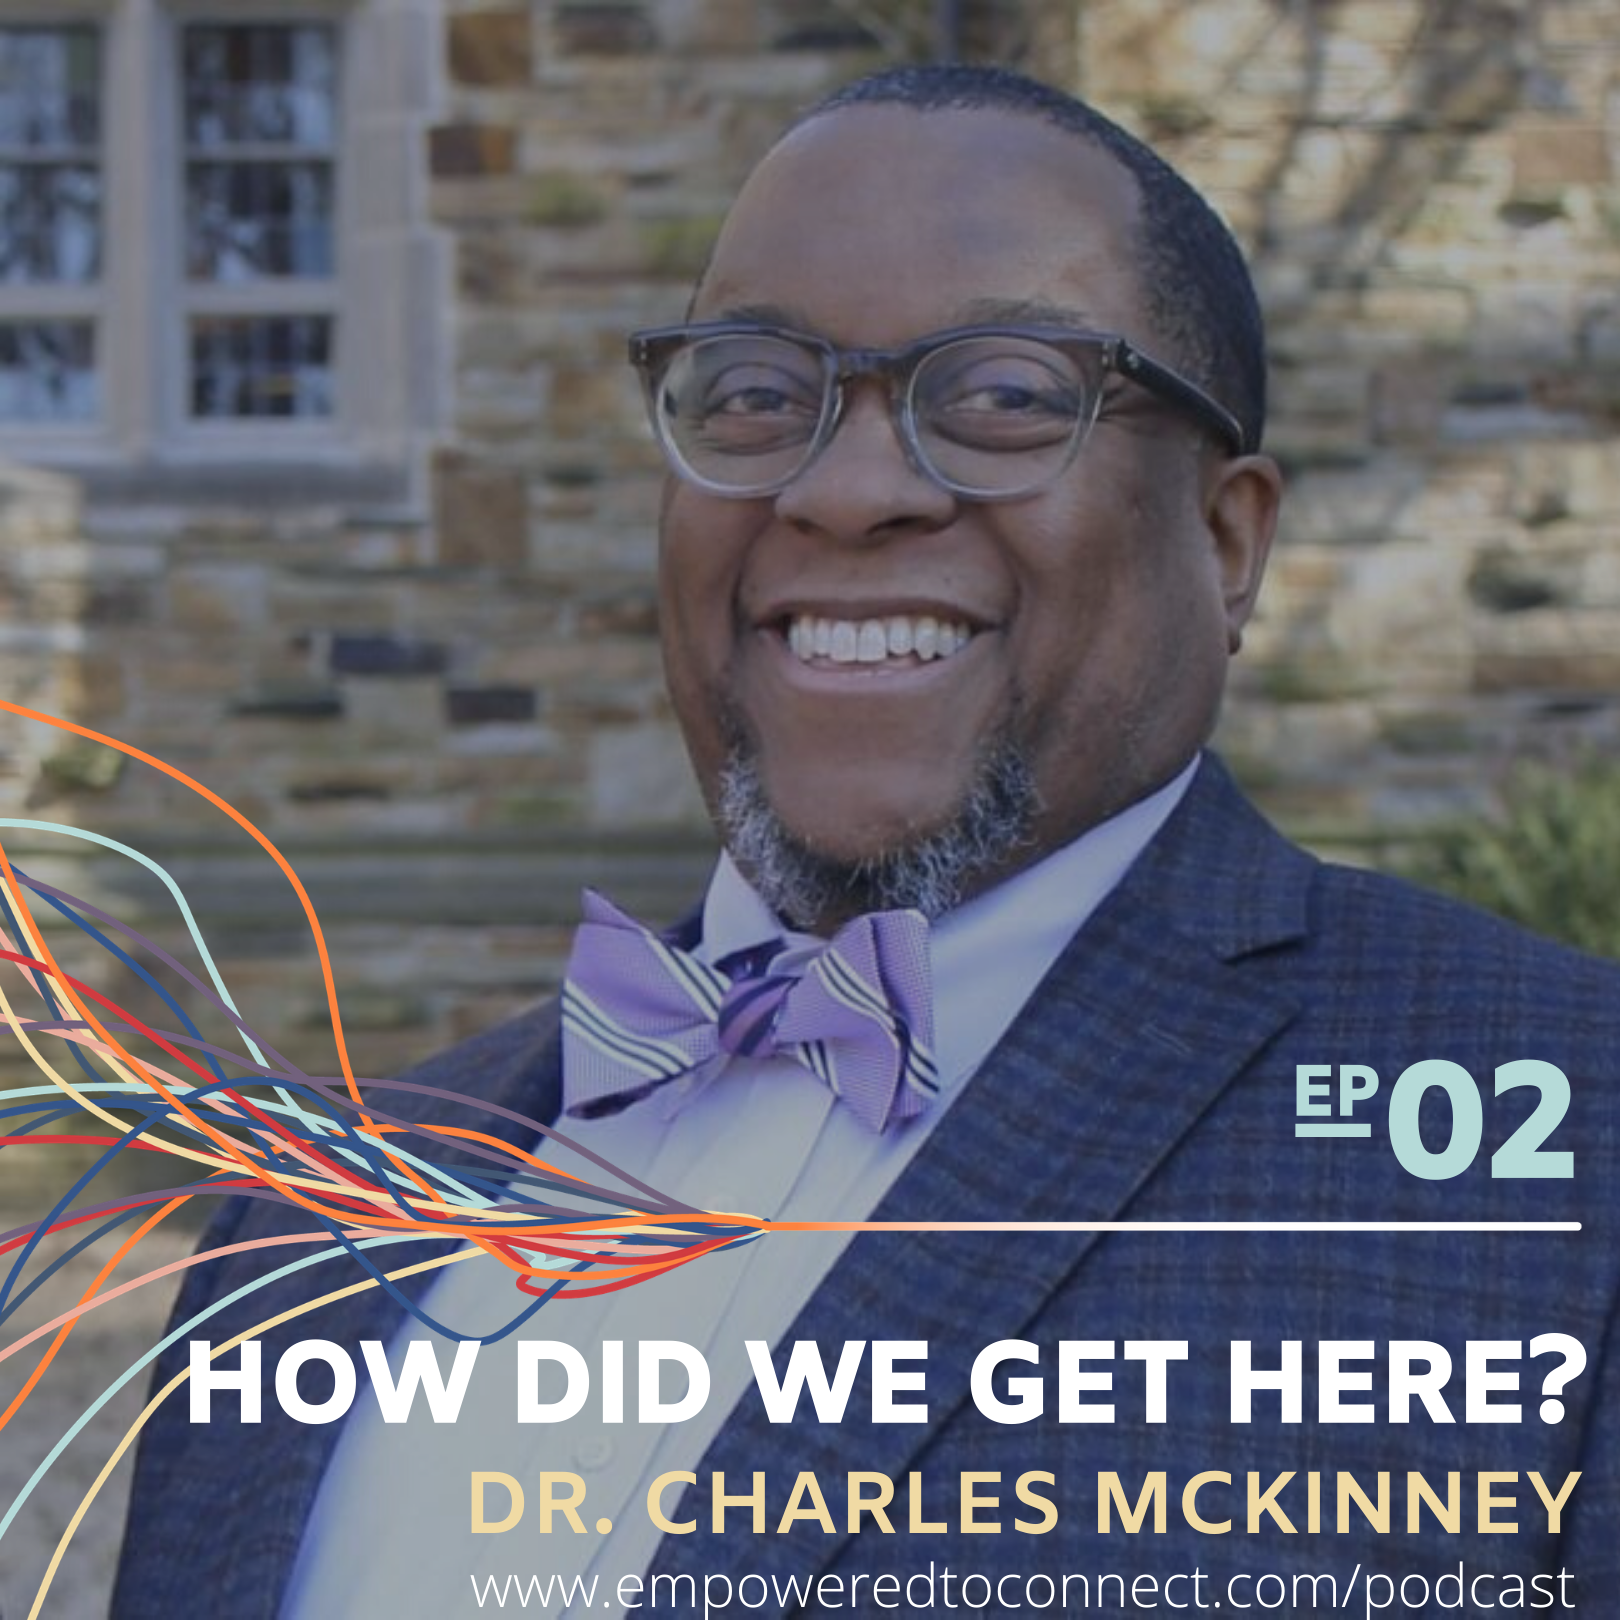 How did we get here? America's racial history with Dr. Charles McKinney - Ep 2